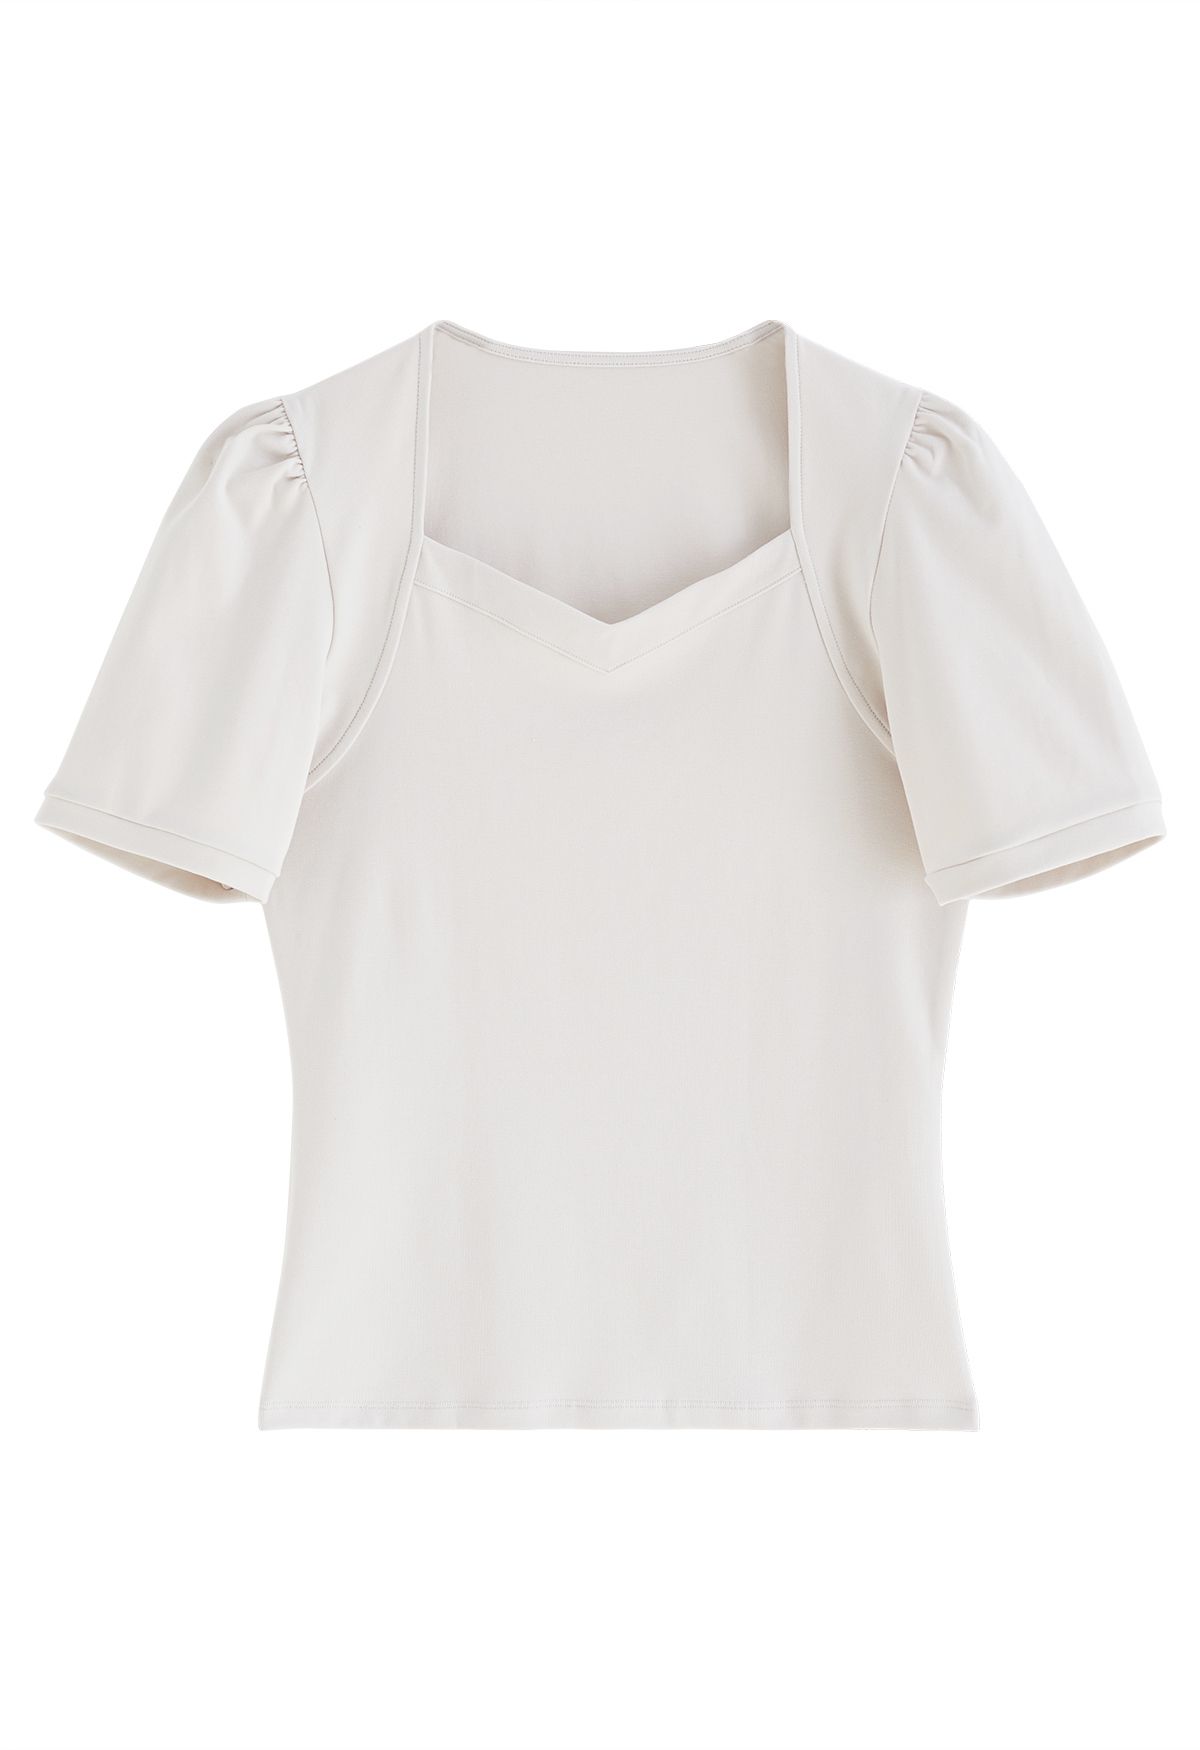 Square Neckline Puff Shoulder T-Shirt in Oatmeal